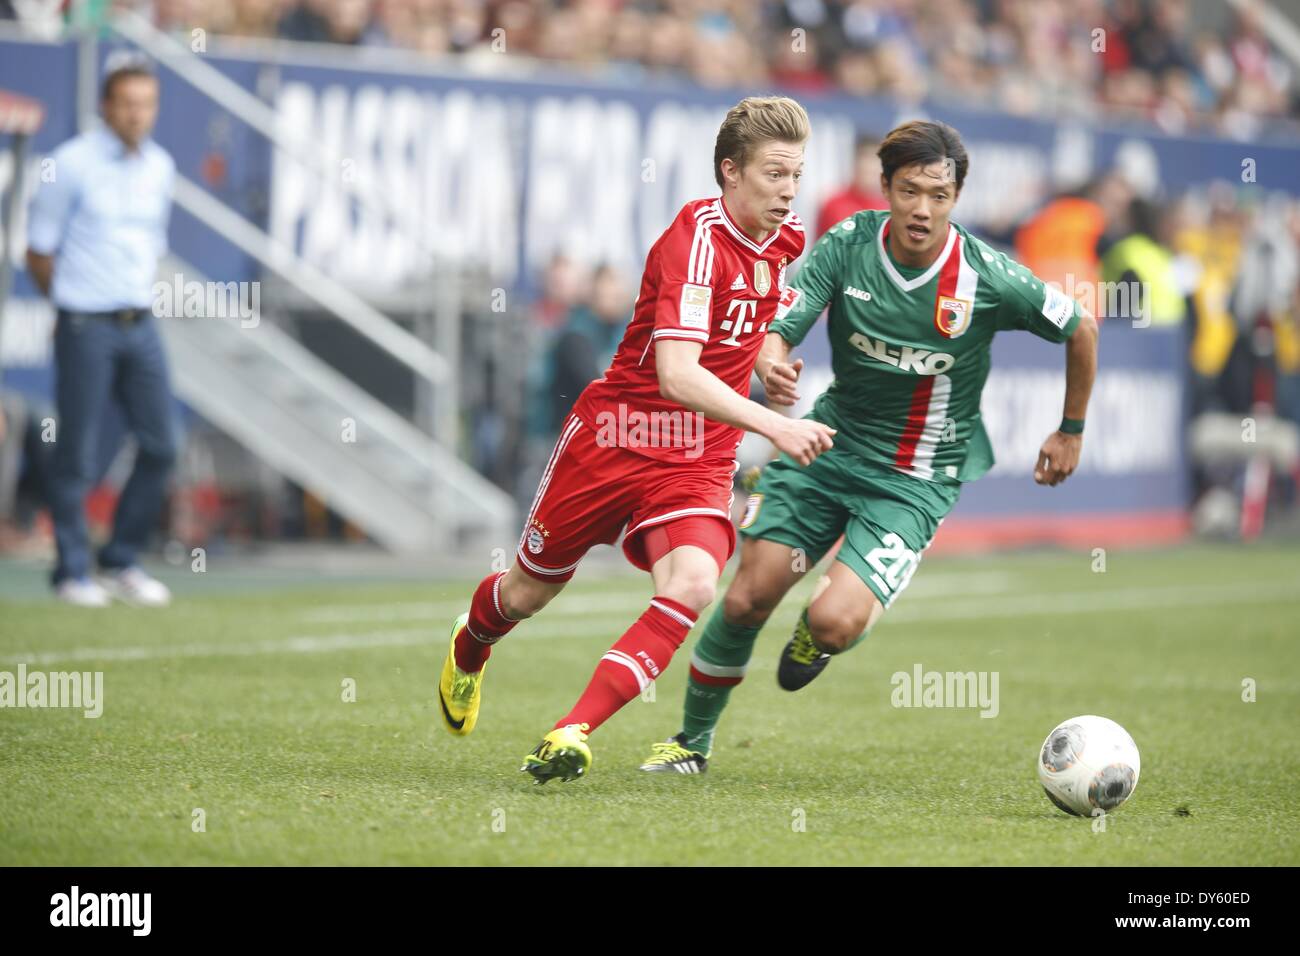 the SGL Arena, Augsburg, Germany. 5th Apr, 2014. (L-R) Mitchell Weiser (Bayern), Hong Jeong-Ho (Augsburg), APRIL 5, 2014 - Football/Soccer : German 'Bundesliga' match between Augsburg and Bayern Munchen, at the SGL Arena, Augsburg, Germany. Credit:  AFLO/Alamy Live News Stock Photo